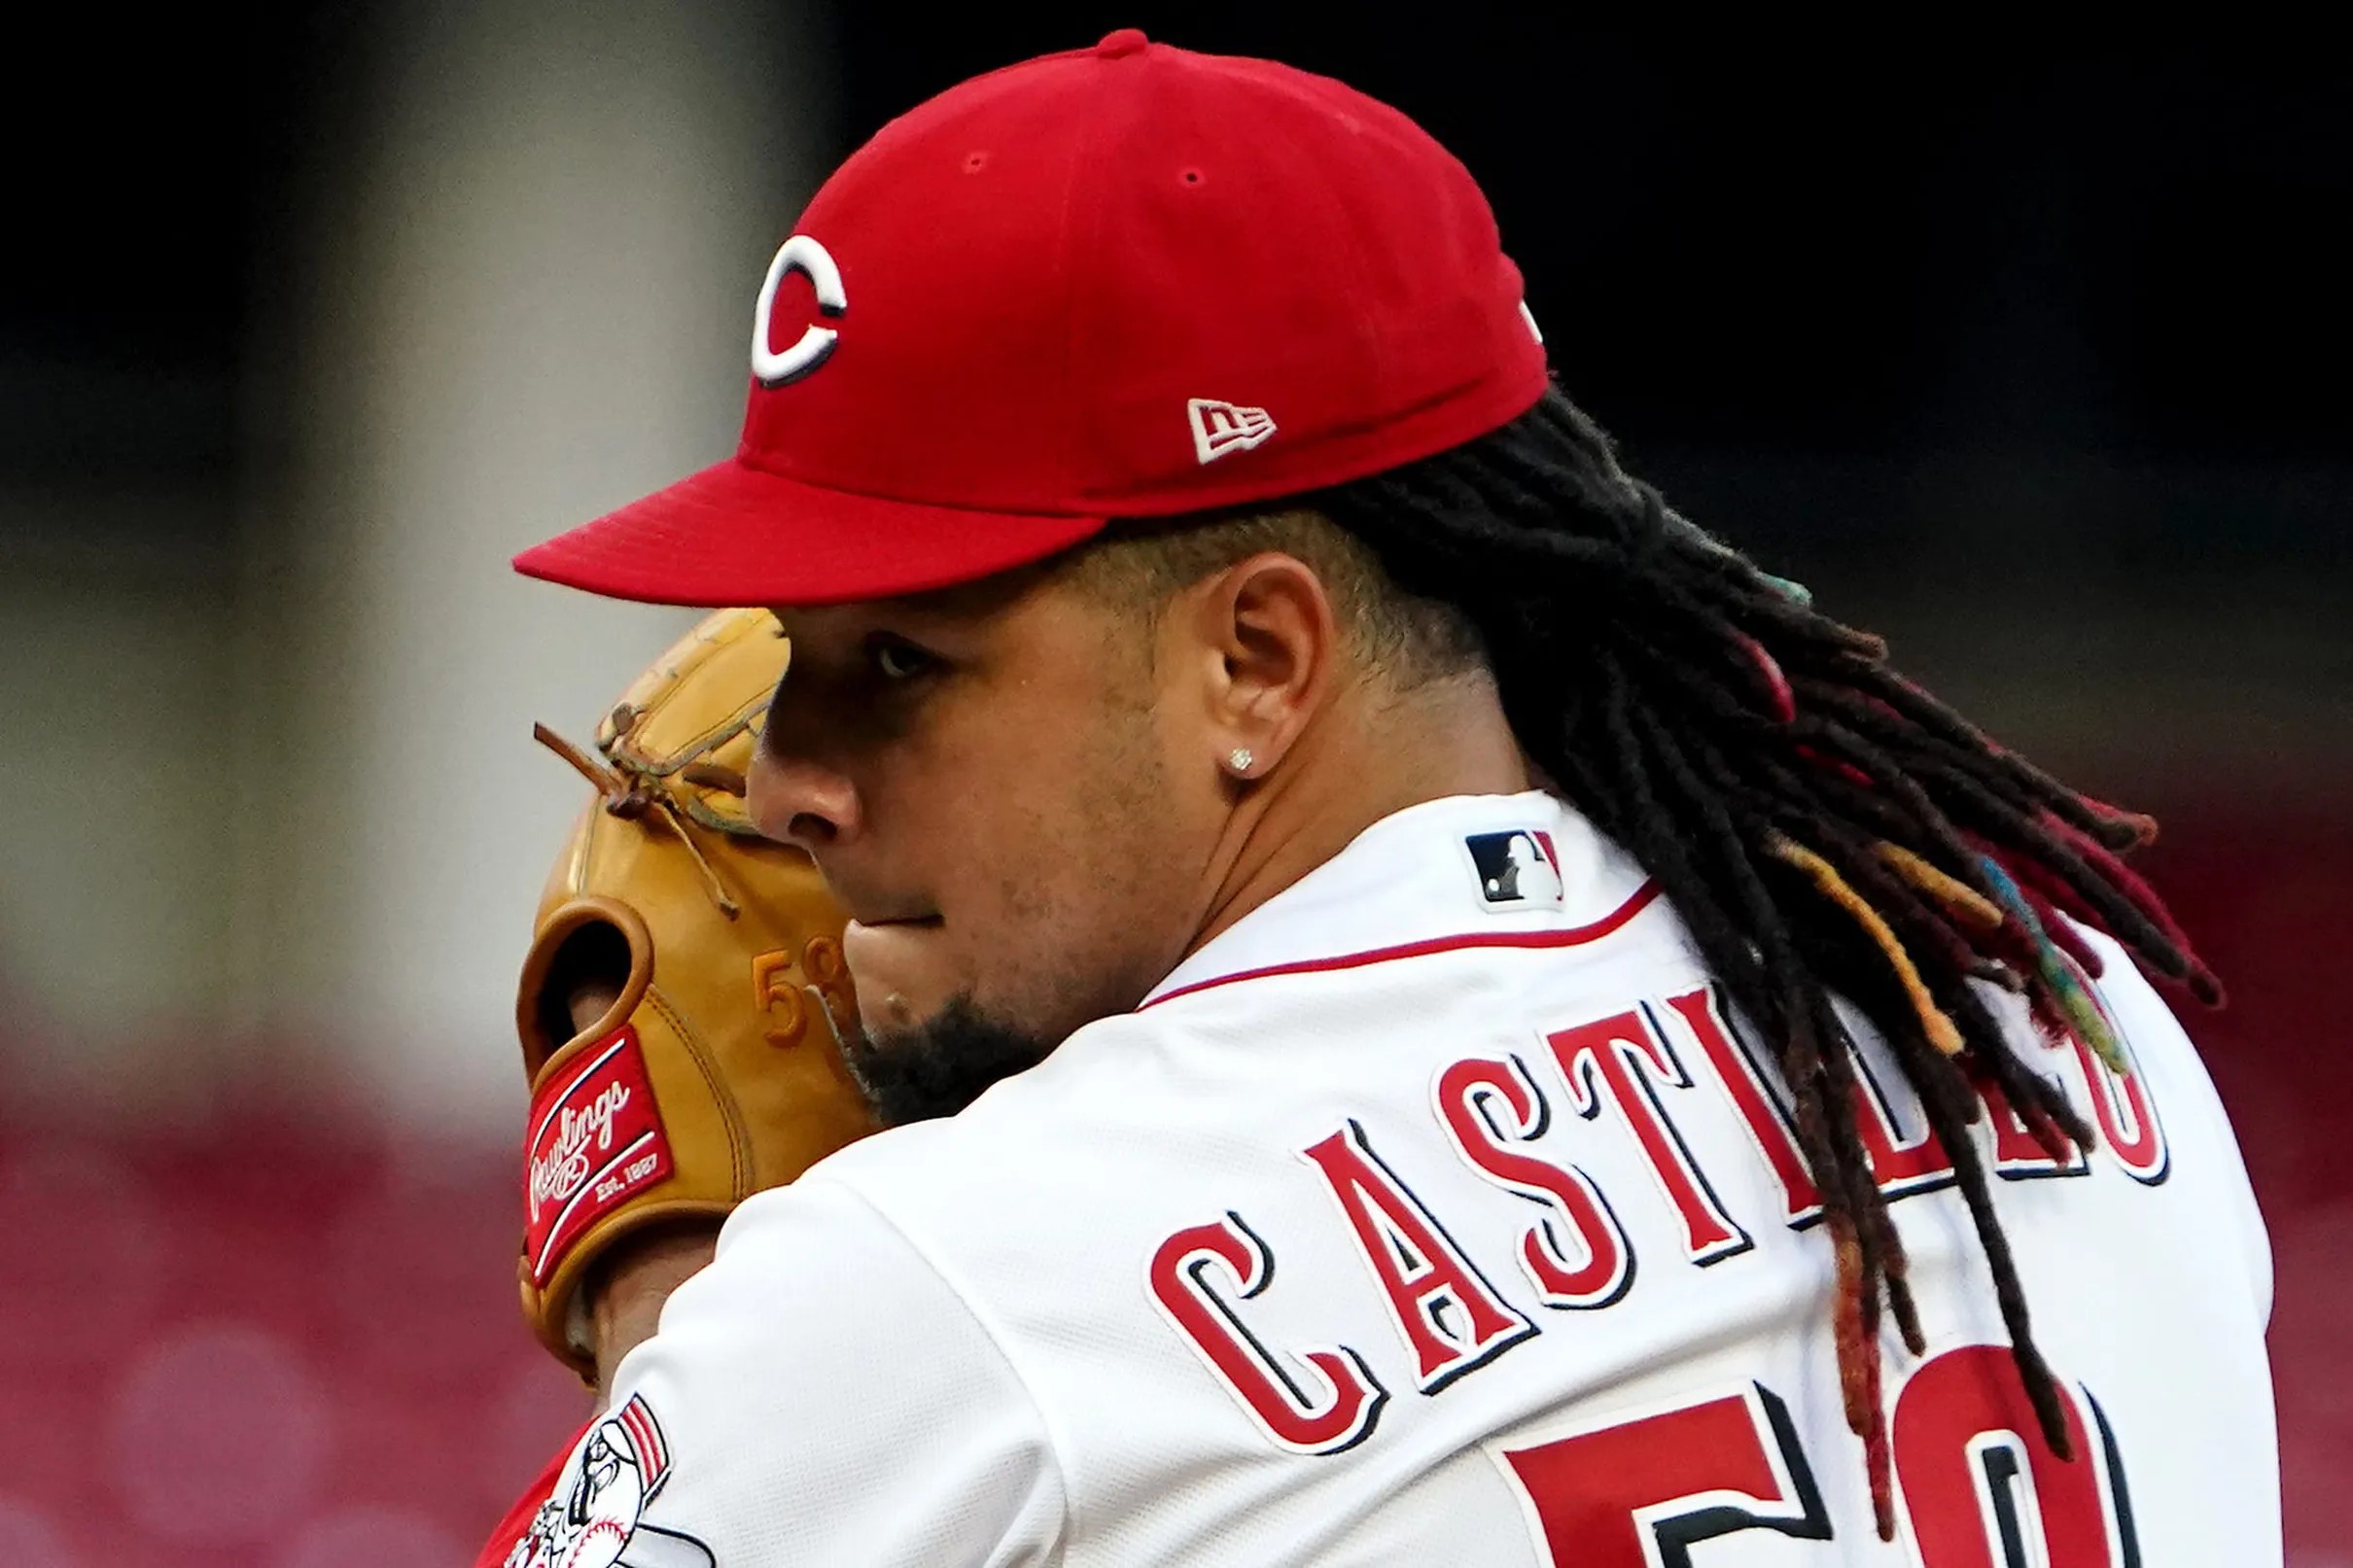 Luis Castillo traded to Mariners: The starts that defined Reds career